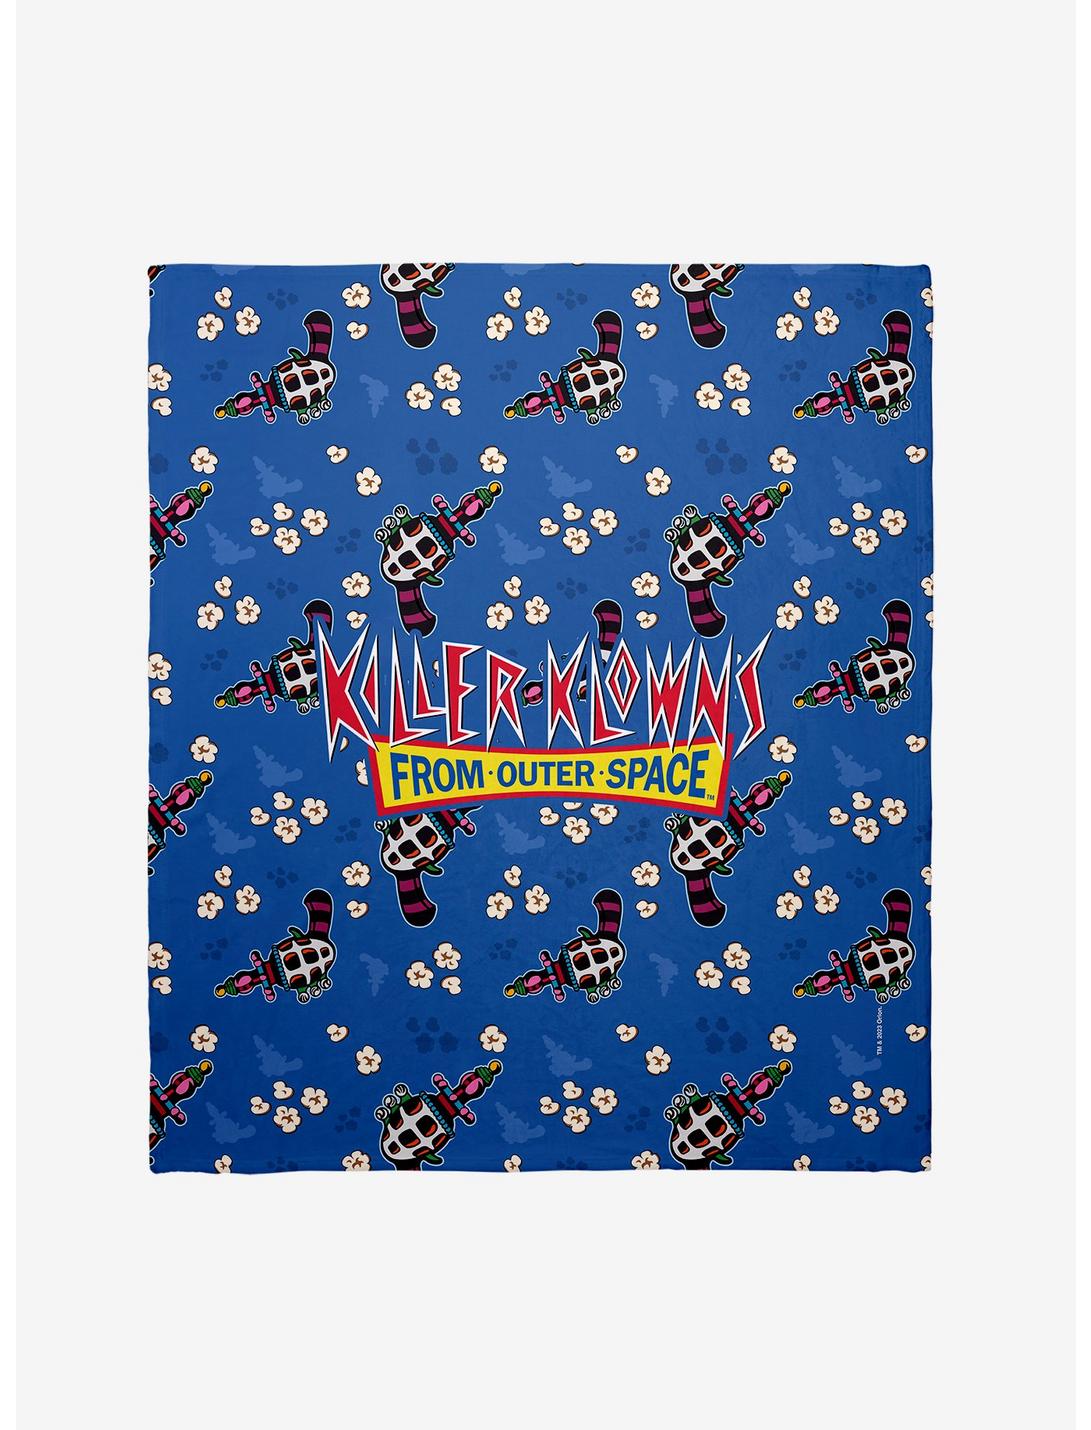 Killer Klowns From Outer Space Cotton Candy Gun Throw Blanket, , hi-res